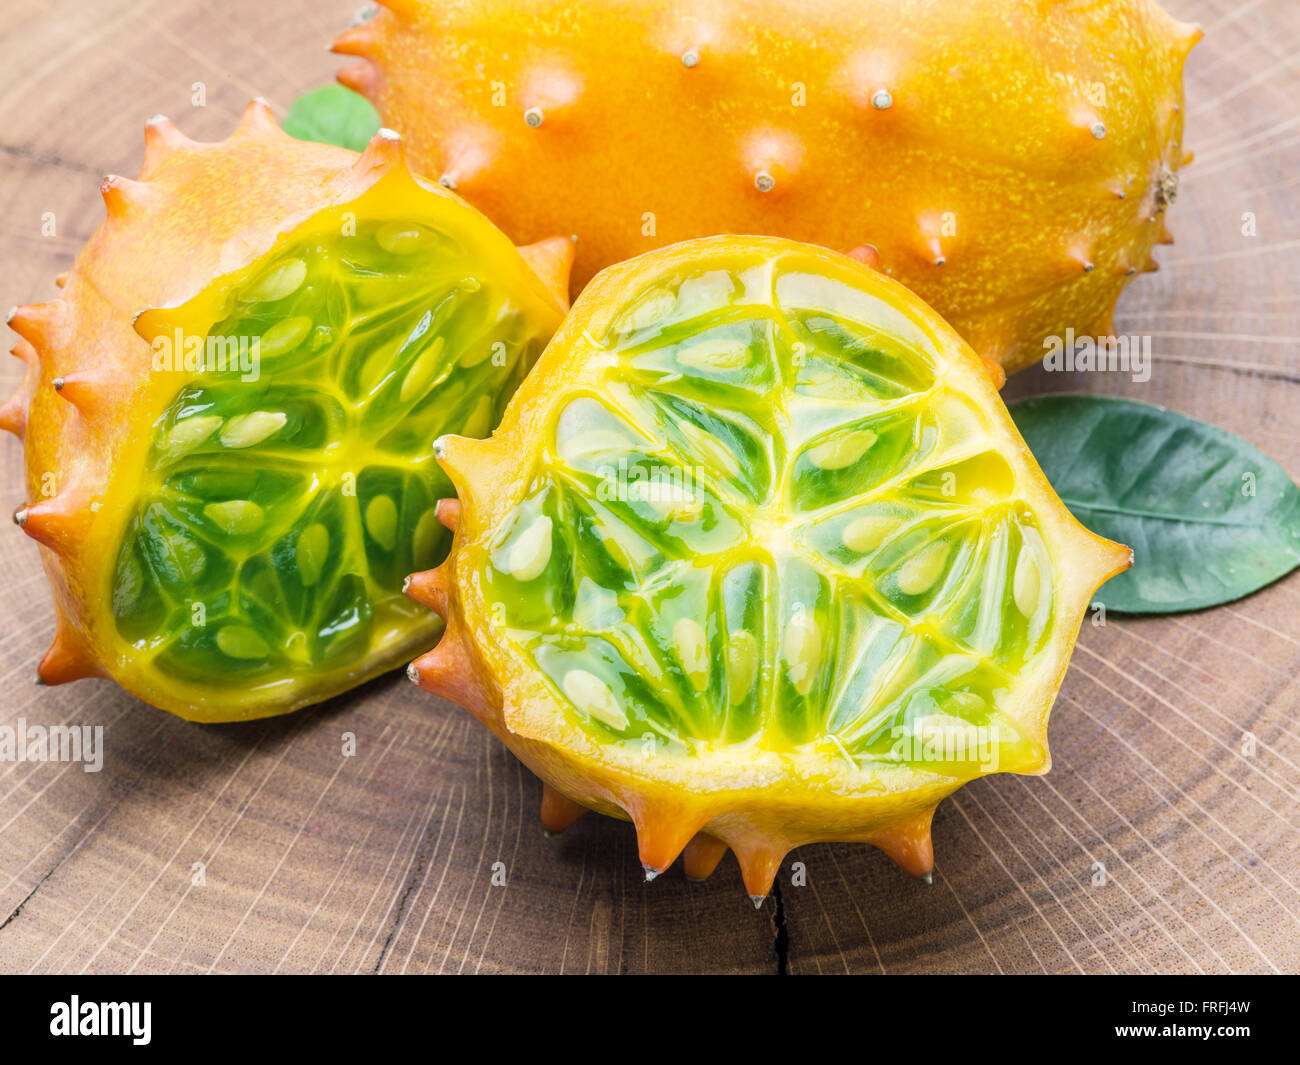 Kiwano fruits on the wooden table. Stock Photo